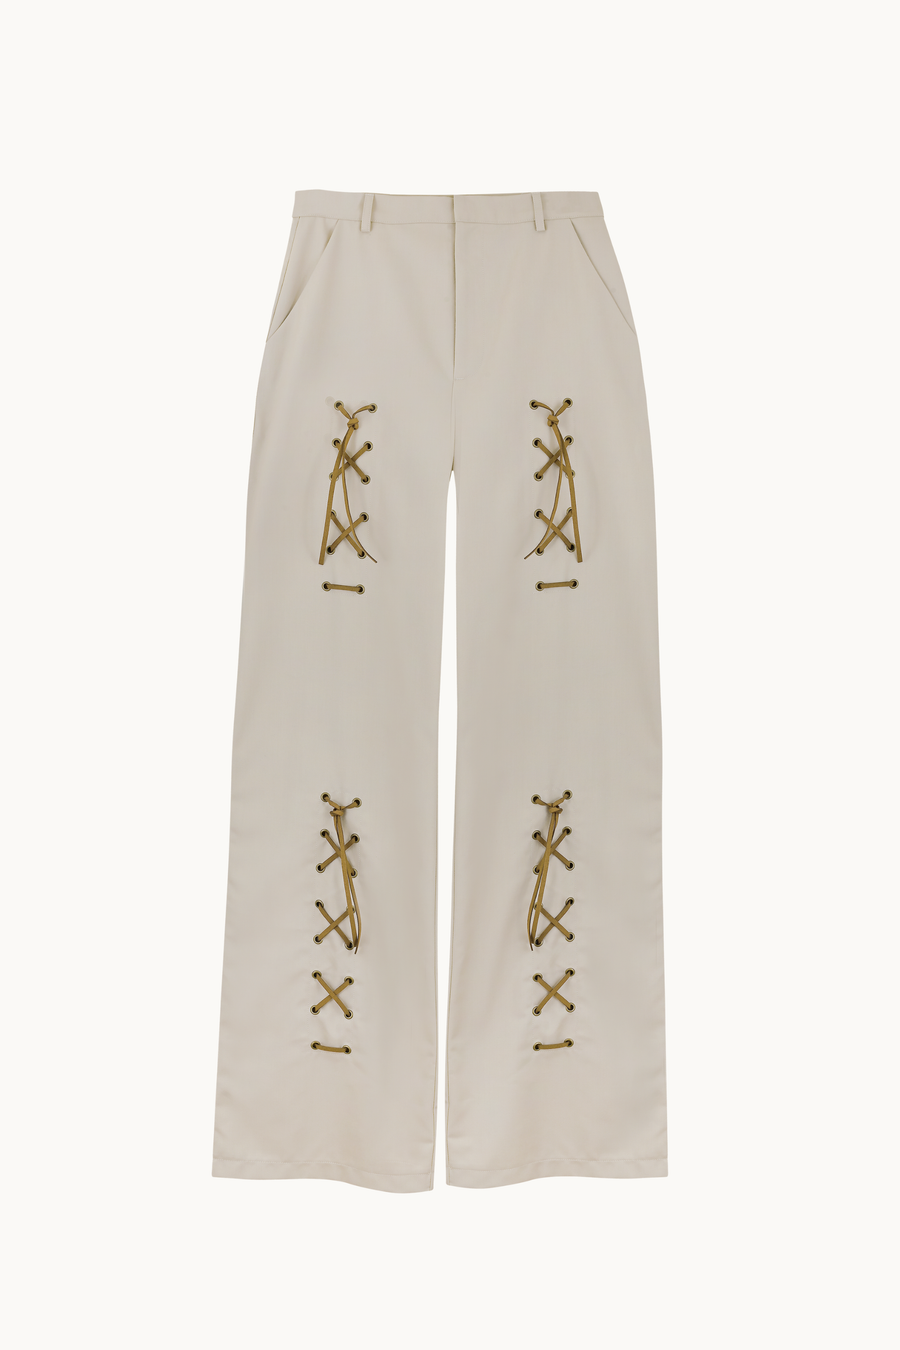 CADILLAC Lace Up Trousers